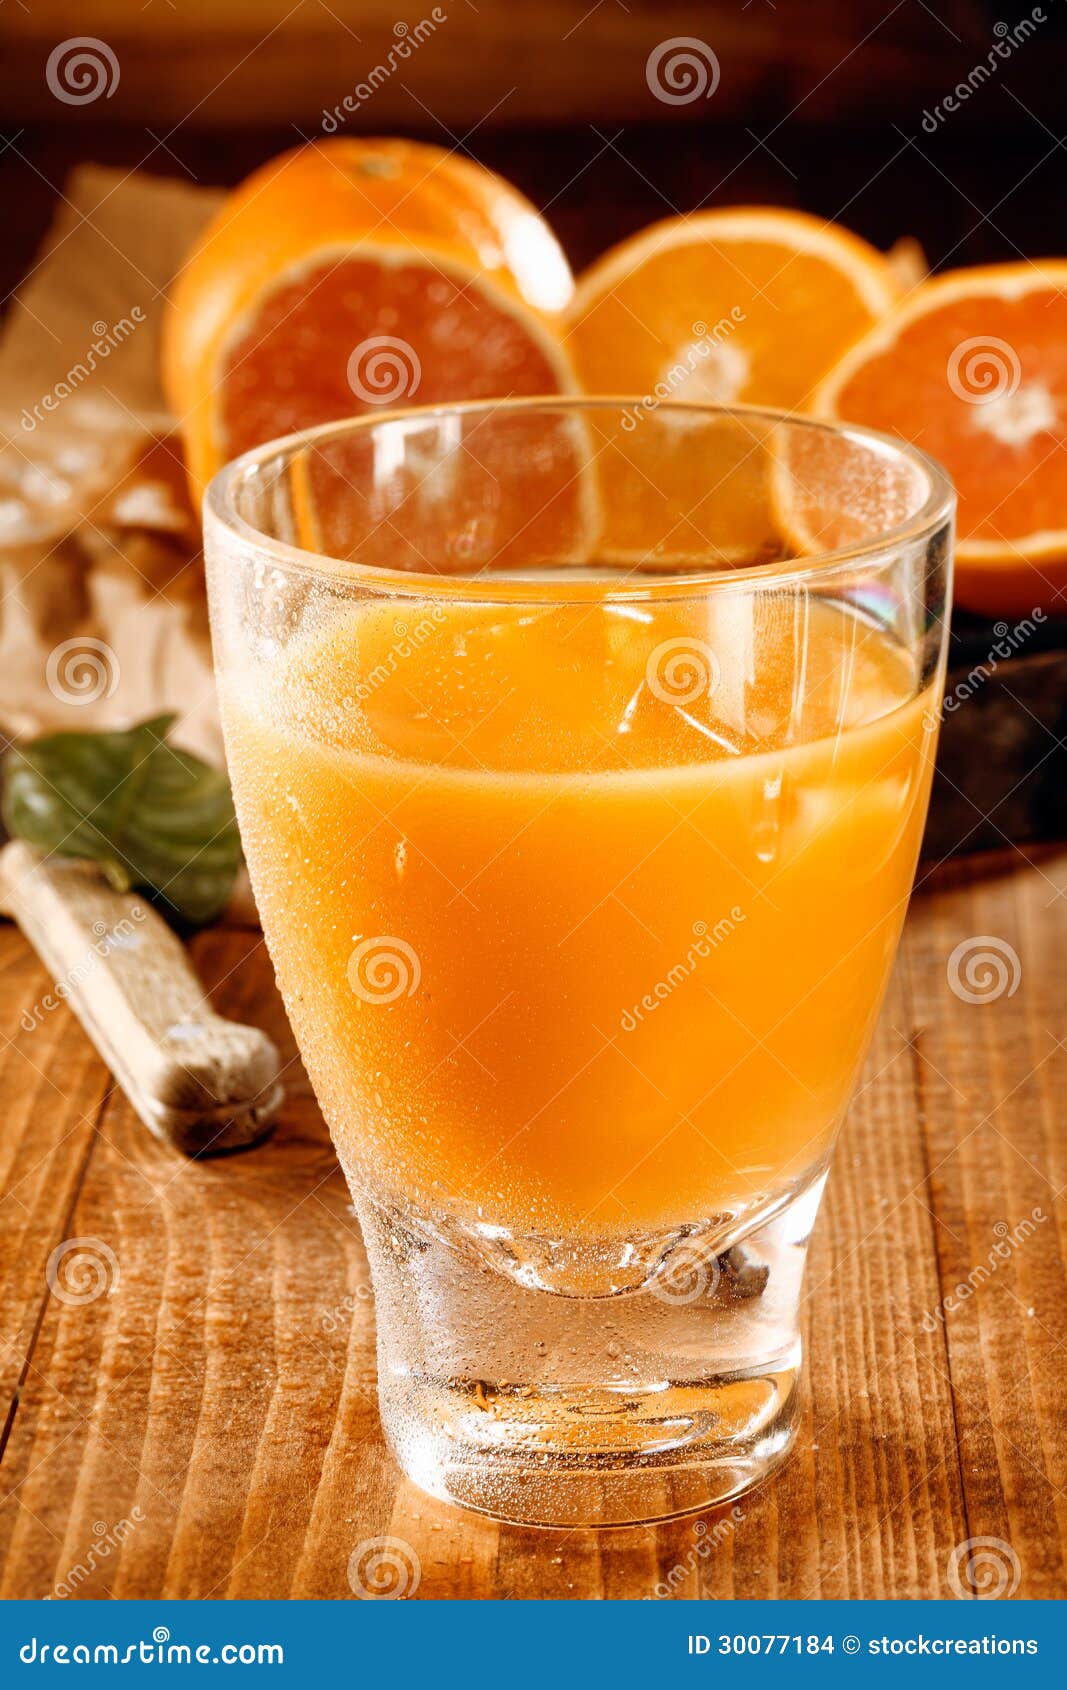 A Glass with Fresh Orange and Grapefruit Juice Stock Photo - Image of ...